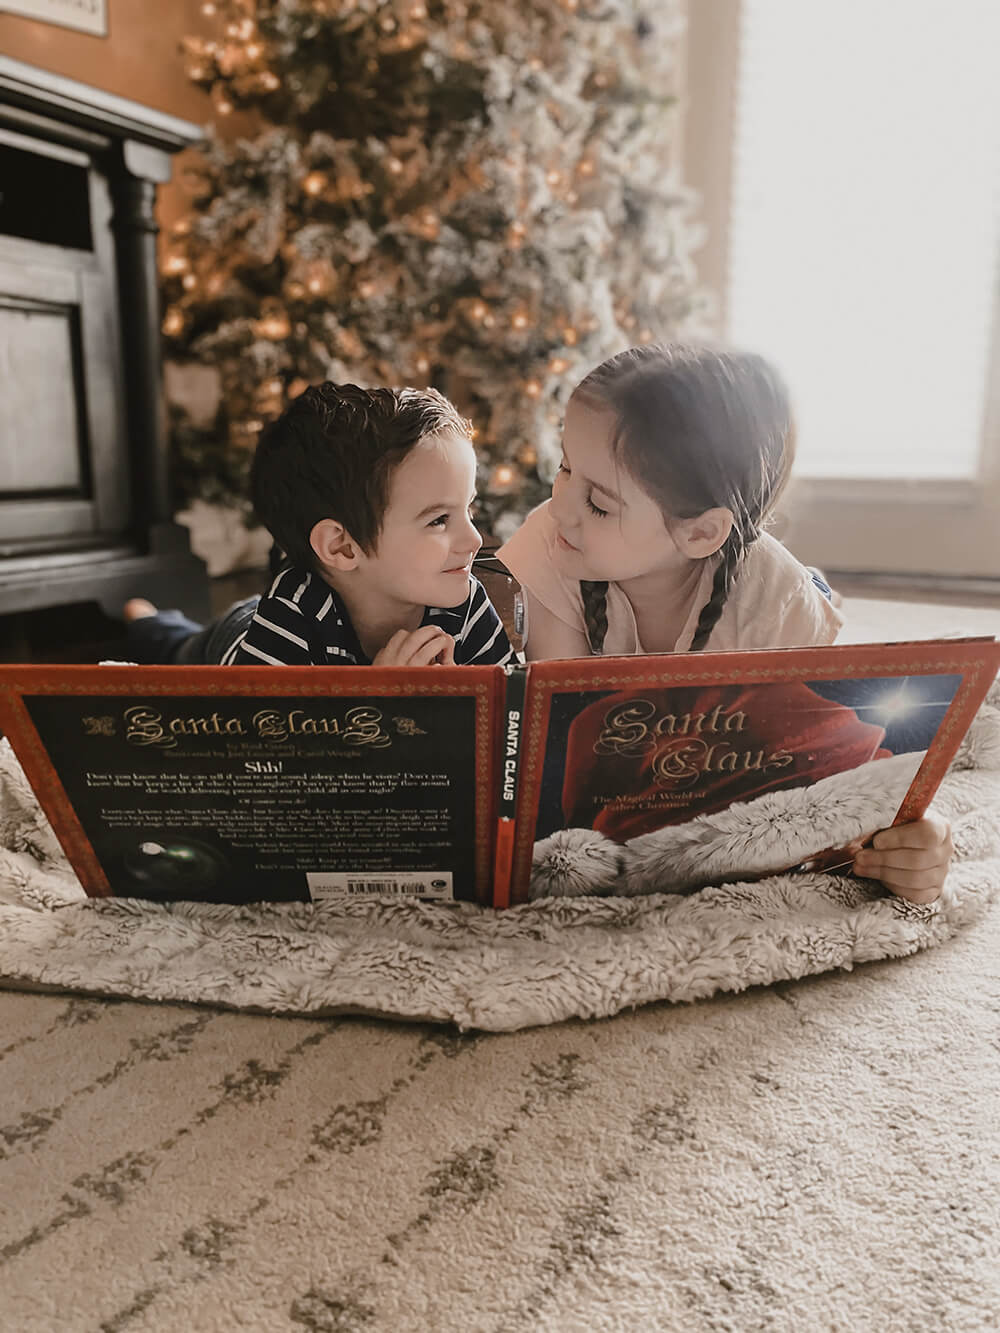 We have been pulling out seasonal reads from our family library and for the kids to enjoy during the winter and holiday season. We love this tradition in our home! Over on the blog I have gathered up a list of our favorite winter and holiday books for the family library. Catch it on KaraLayne.com!